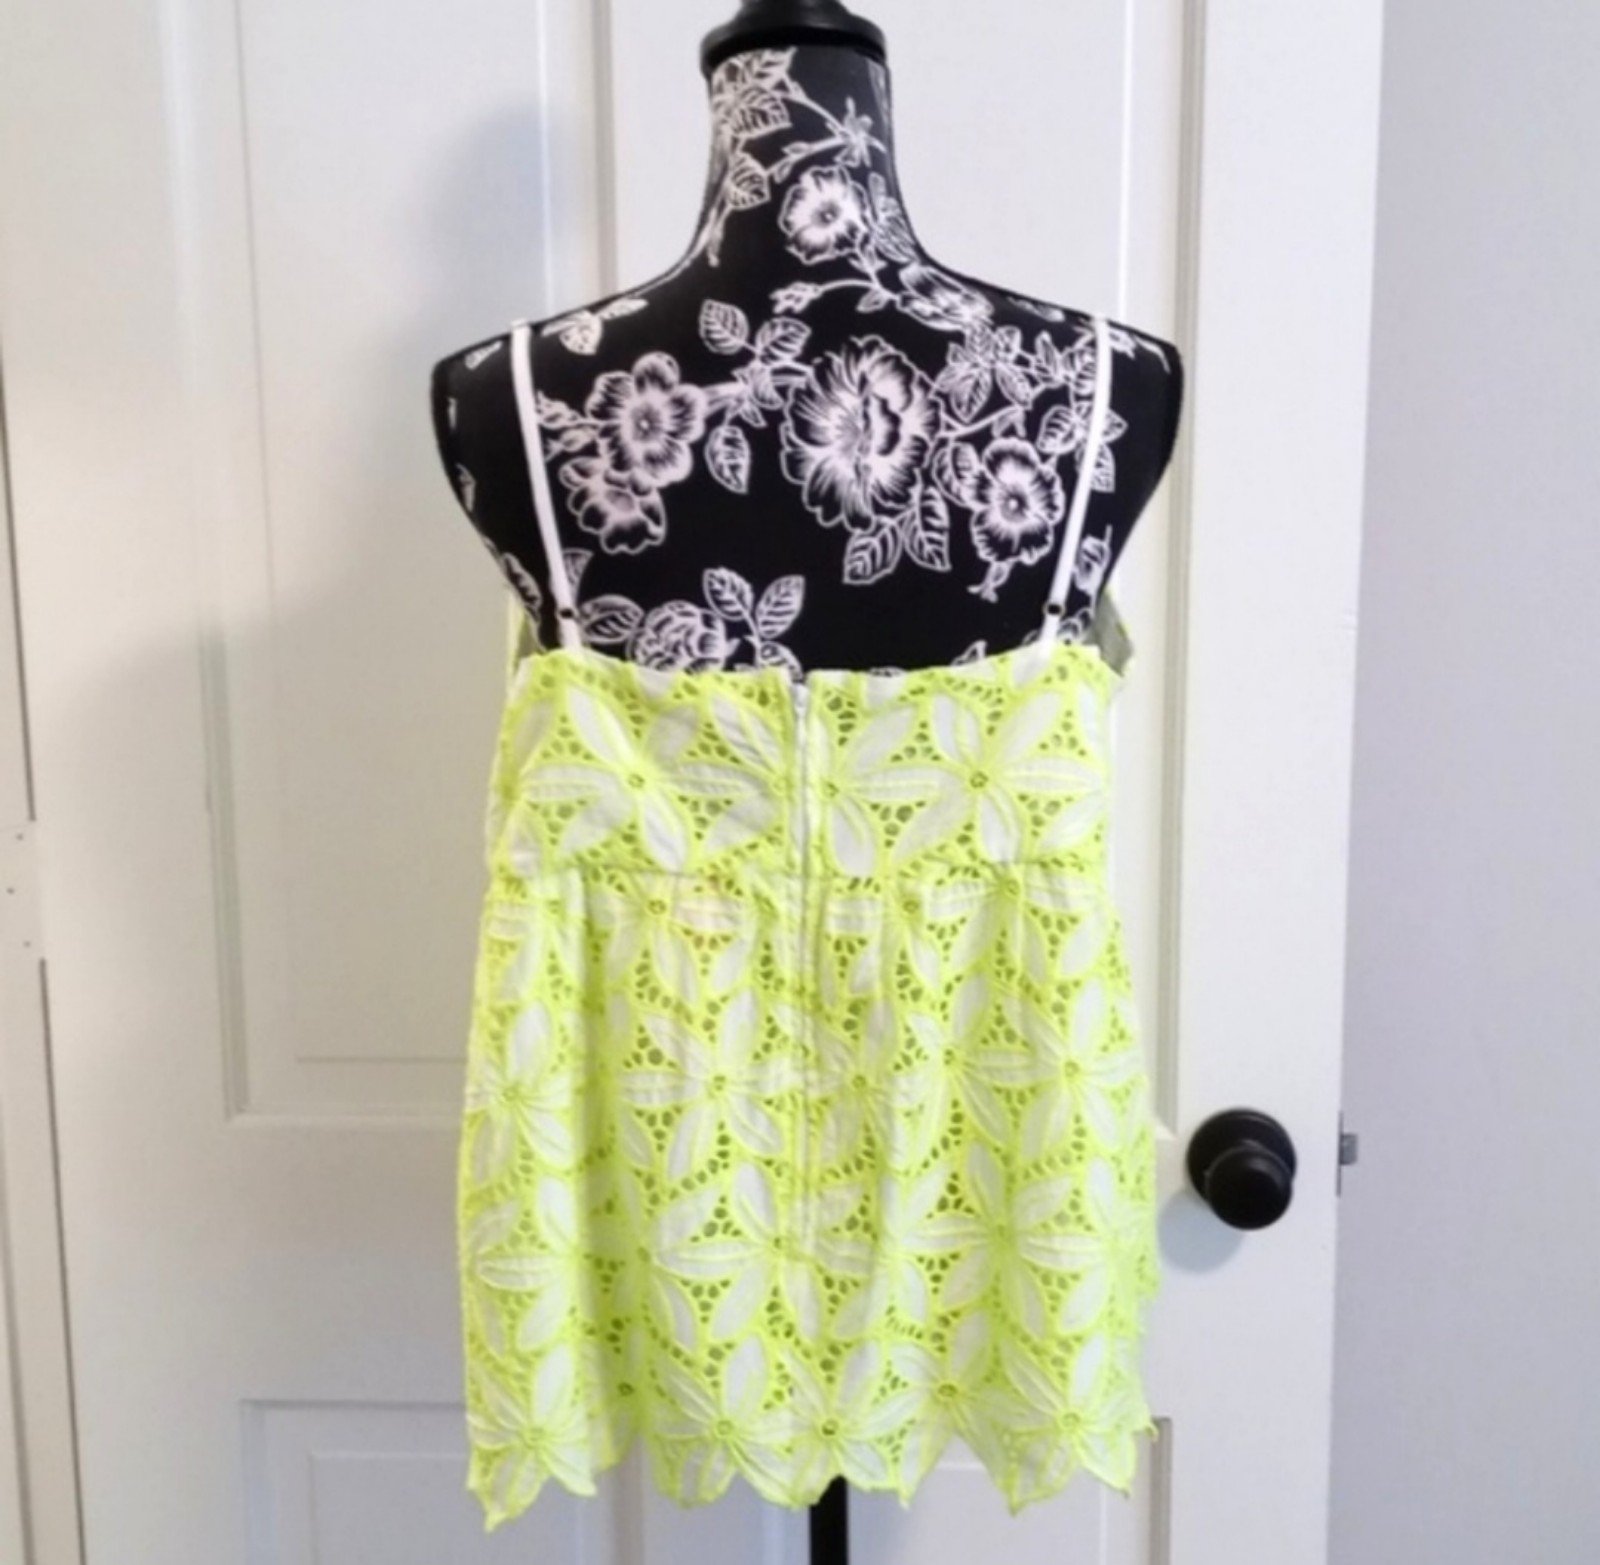 Wholesale price SIZE 14 NWT HTF Lilly Pulitzer - Mellie Top PhUG3VIze well sale